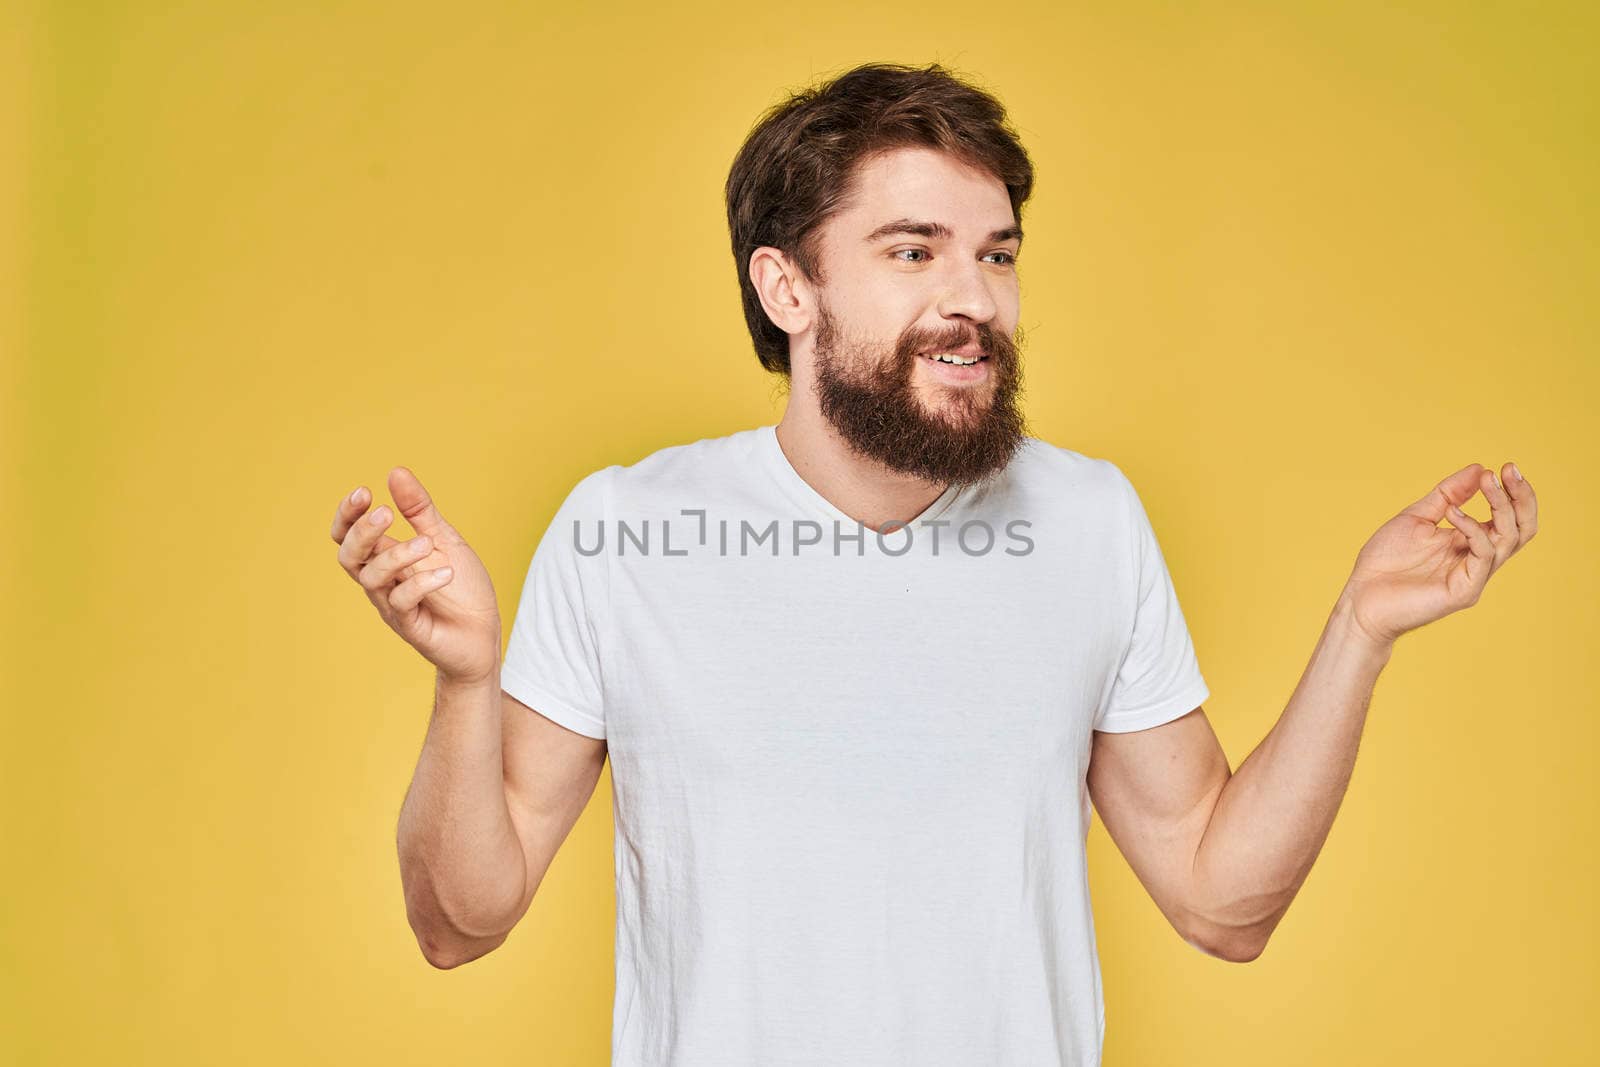 Bearded man on emotions white t-shirt fun lifestyle yellow background. High quality photo